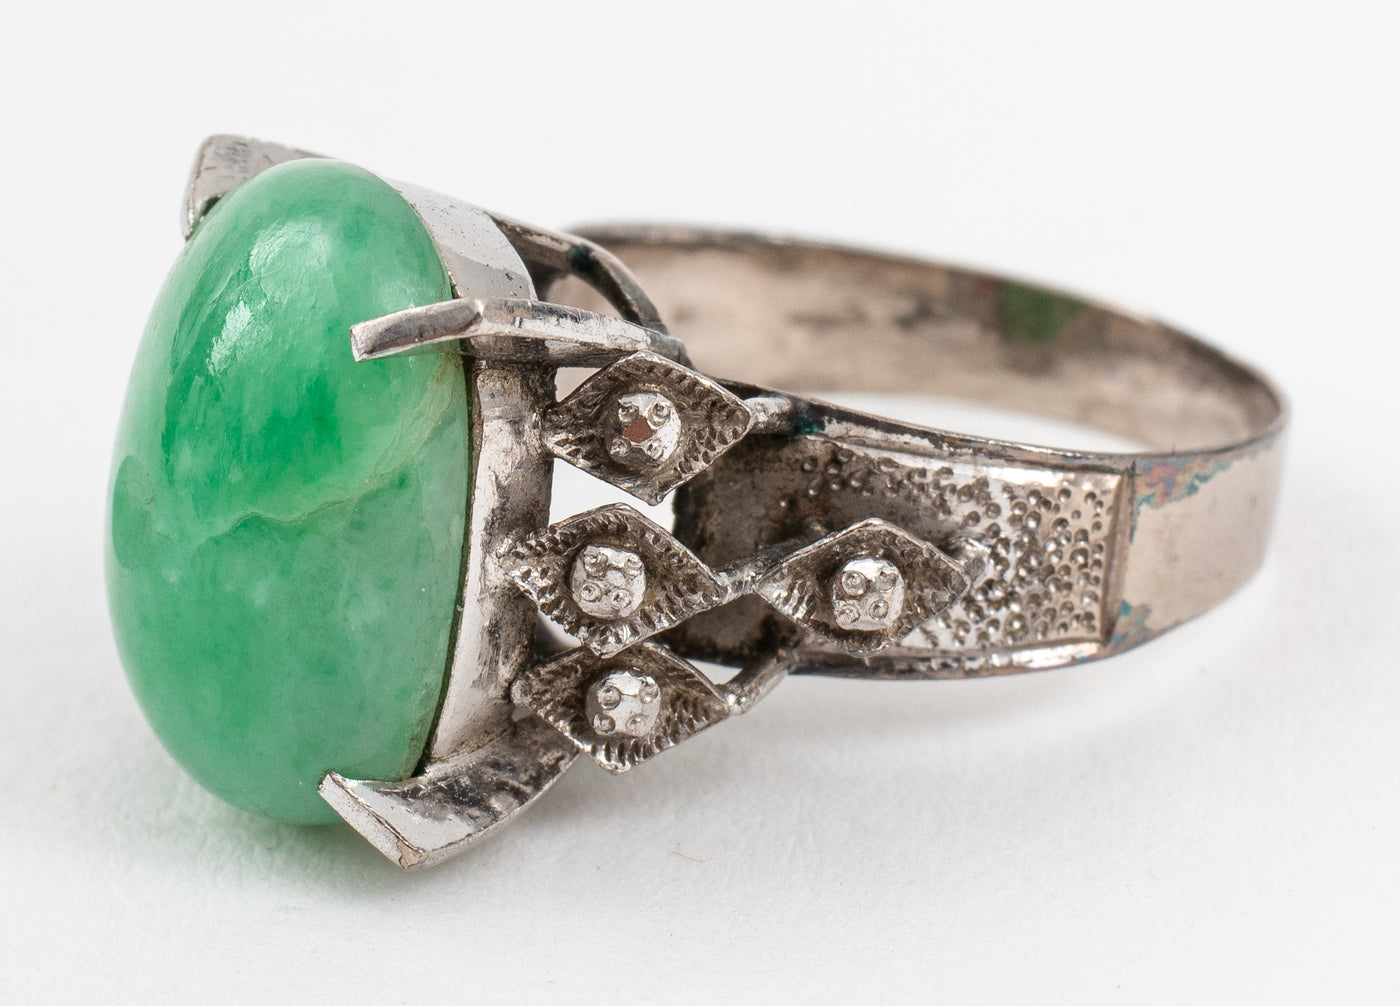 RealJade® Co | Authentic Jadeite, Nephrite Jade Rings | Shop now and find  your style – RealJade® Co.